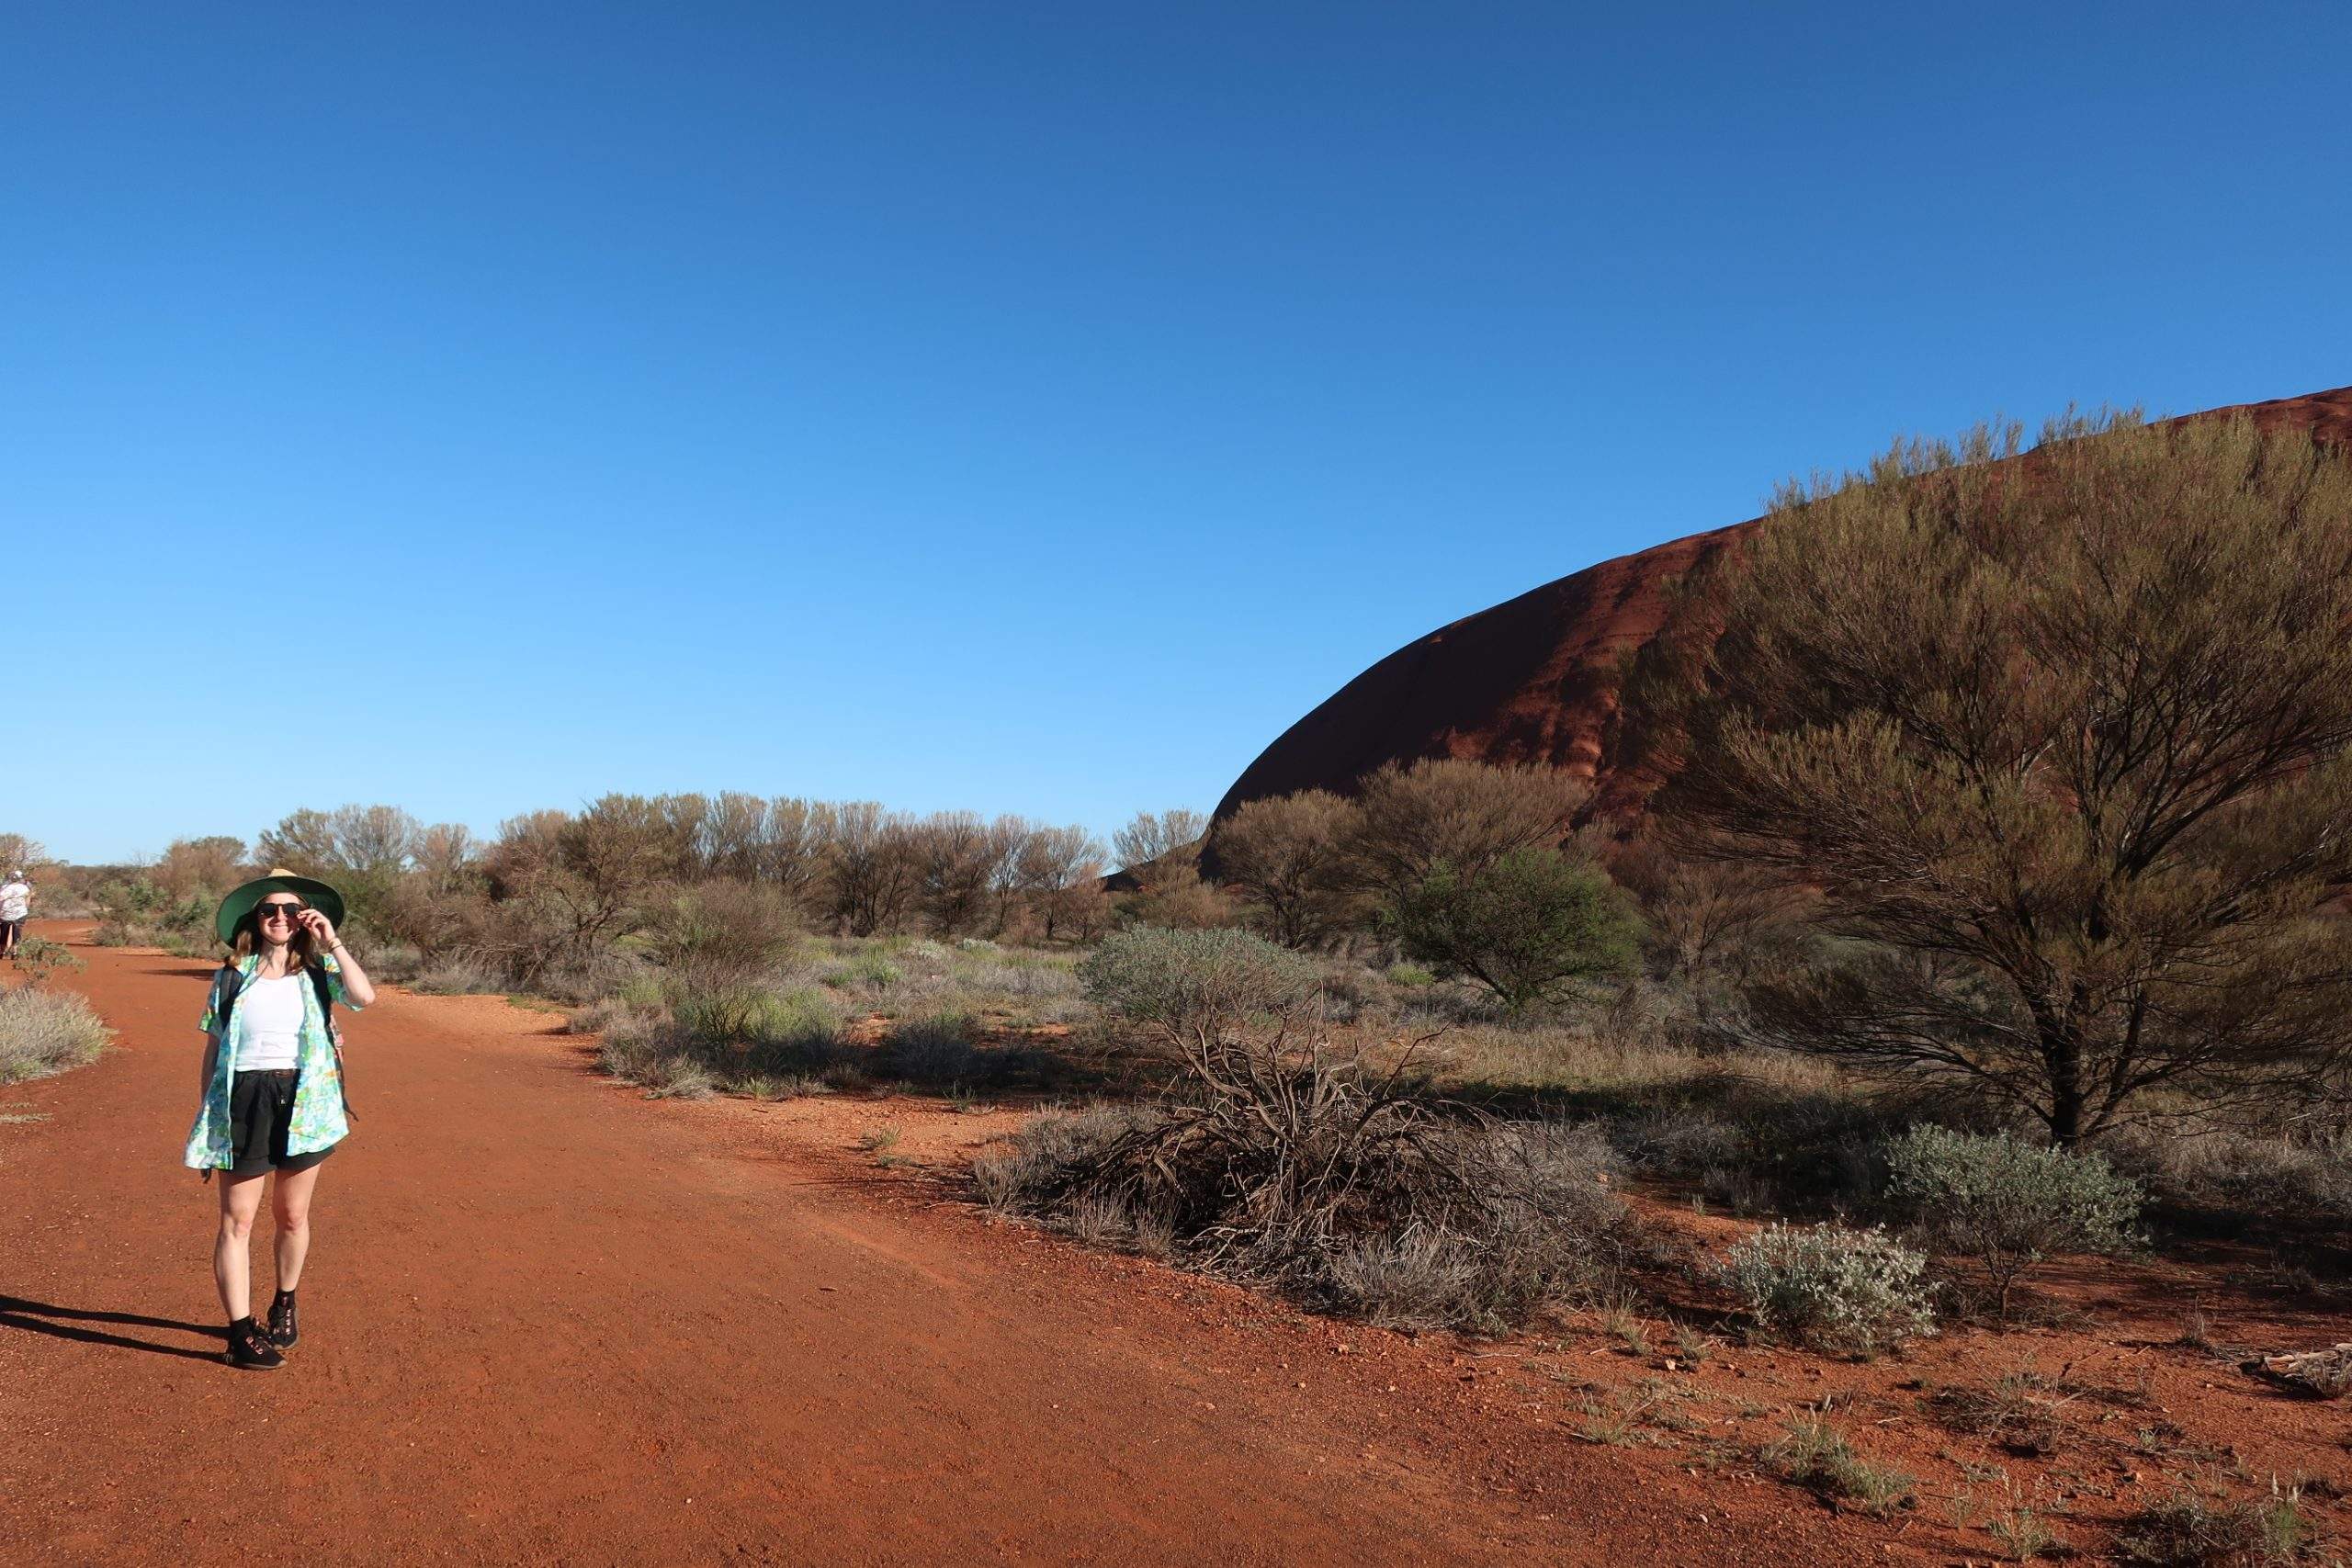 I Finally Made the Journey to Central Australia — and It Soars Beyond Expectation